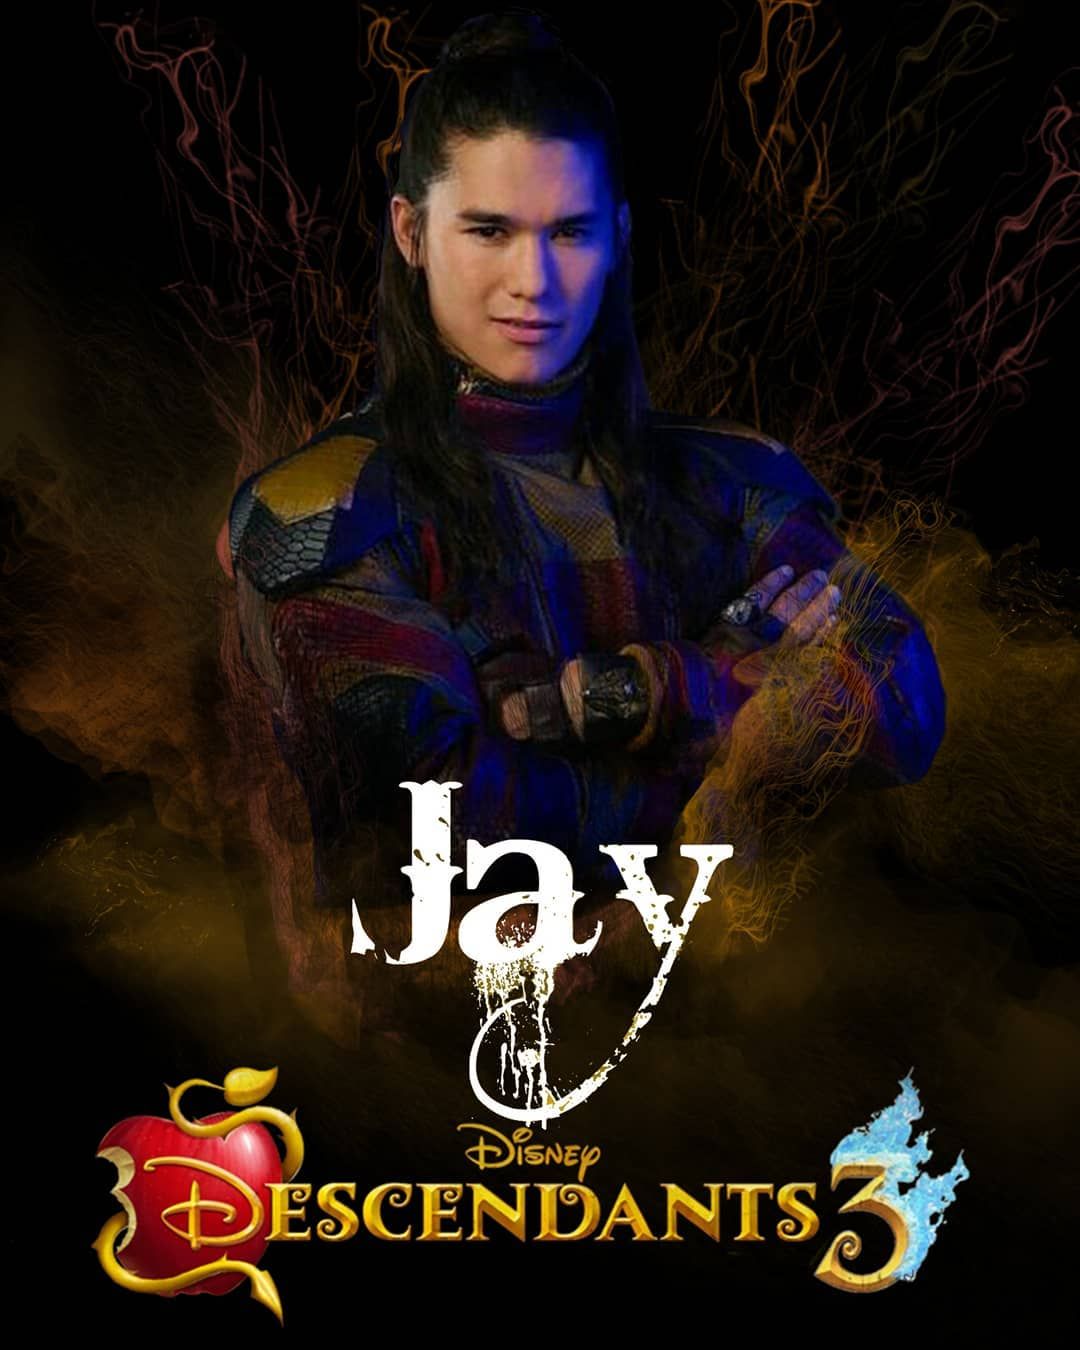 The name is Jay